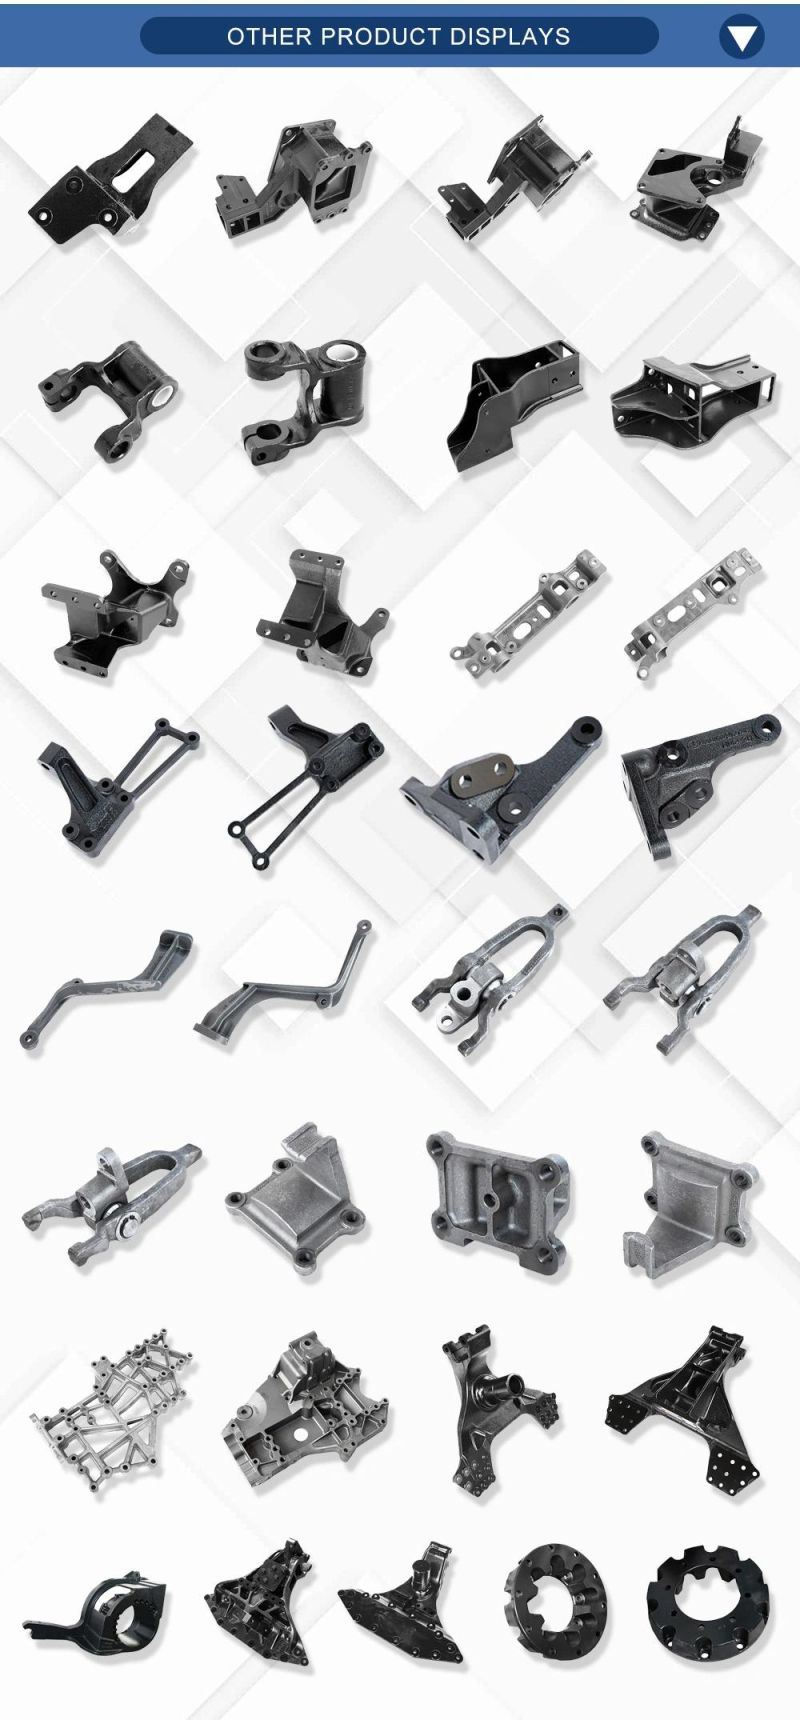 Auto/Trailer/Forklift/Motor/Vehicle/Truck/Train/Railway/Machinery Parts in Lost Wax/Investment/Precision/Casting-Metal/Carbon/Alloy/Stainless Steel